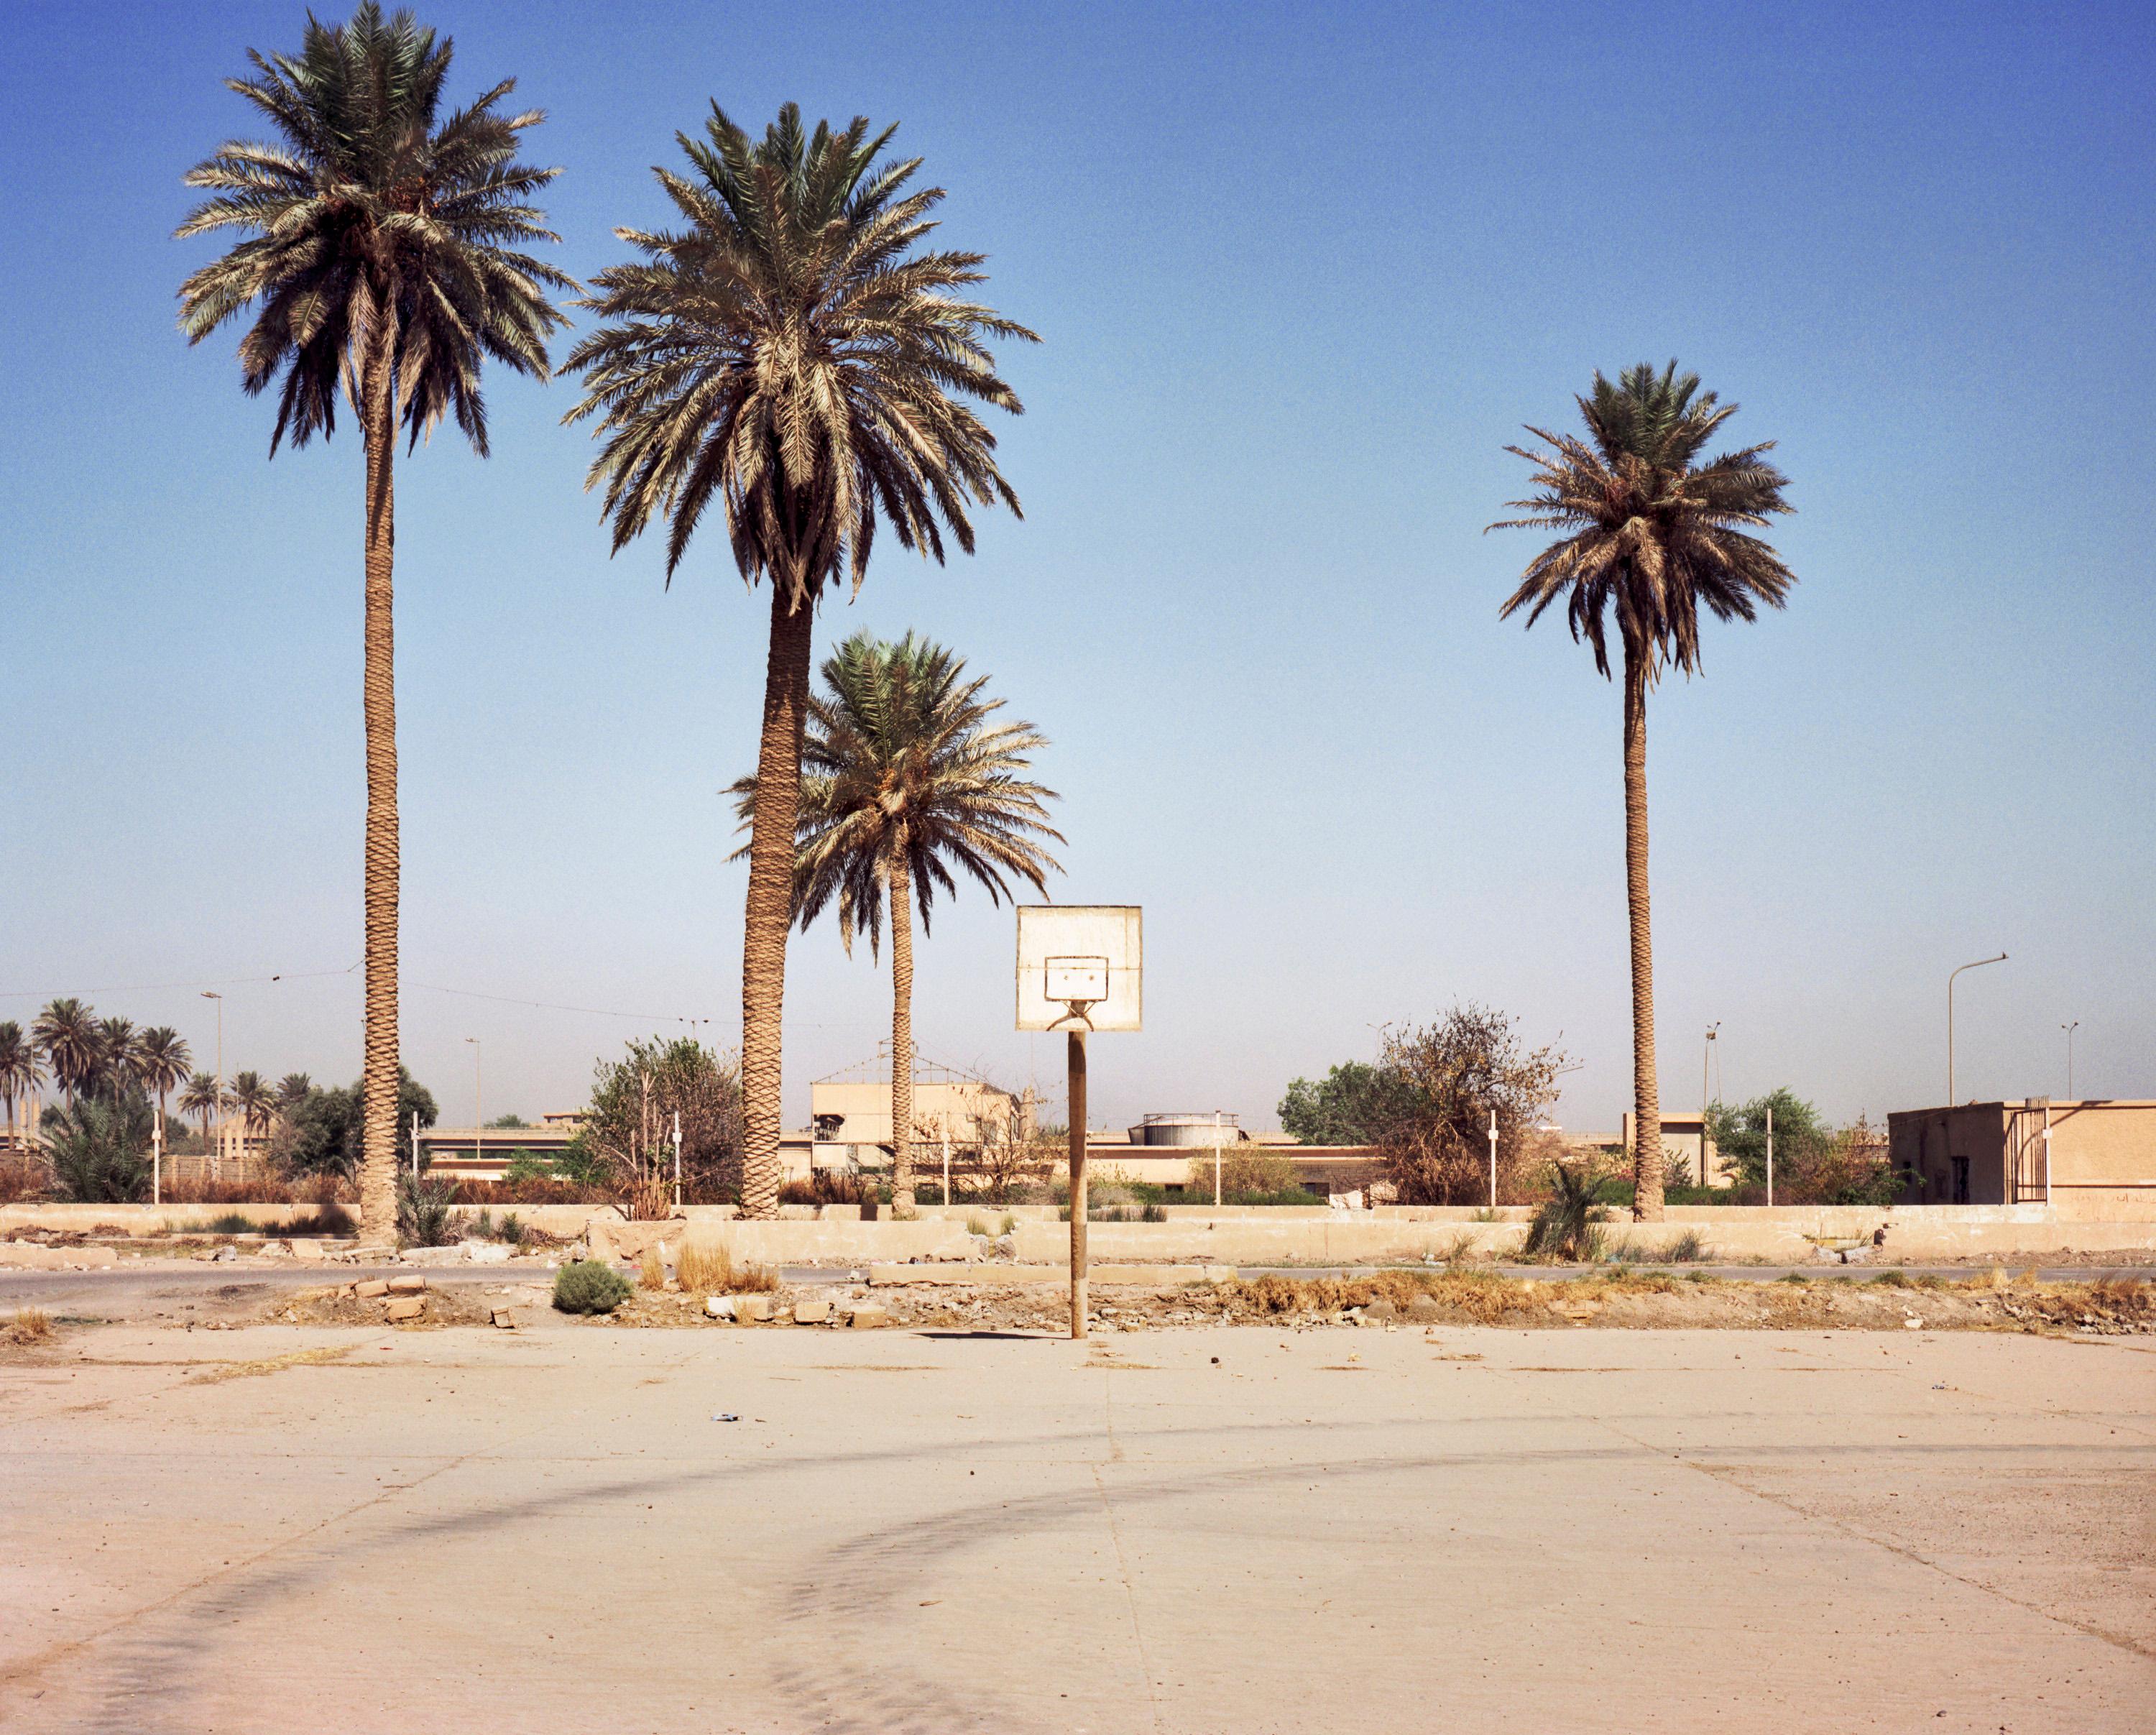 Sean Hemmerle Color Photograph - "Baghdad, Iraq, 2003" HOOPS basketball court limited edition photograph